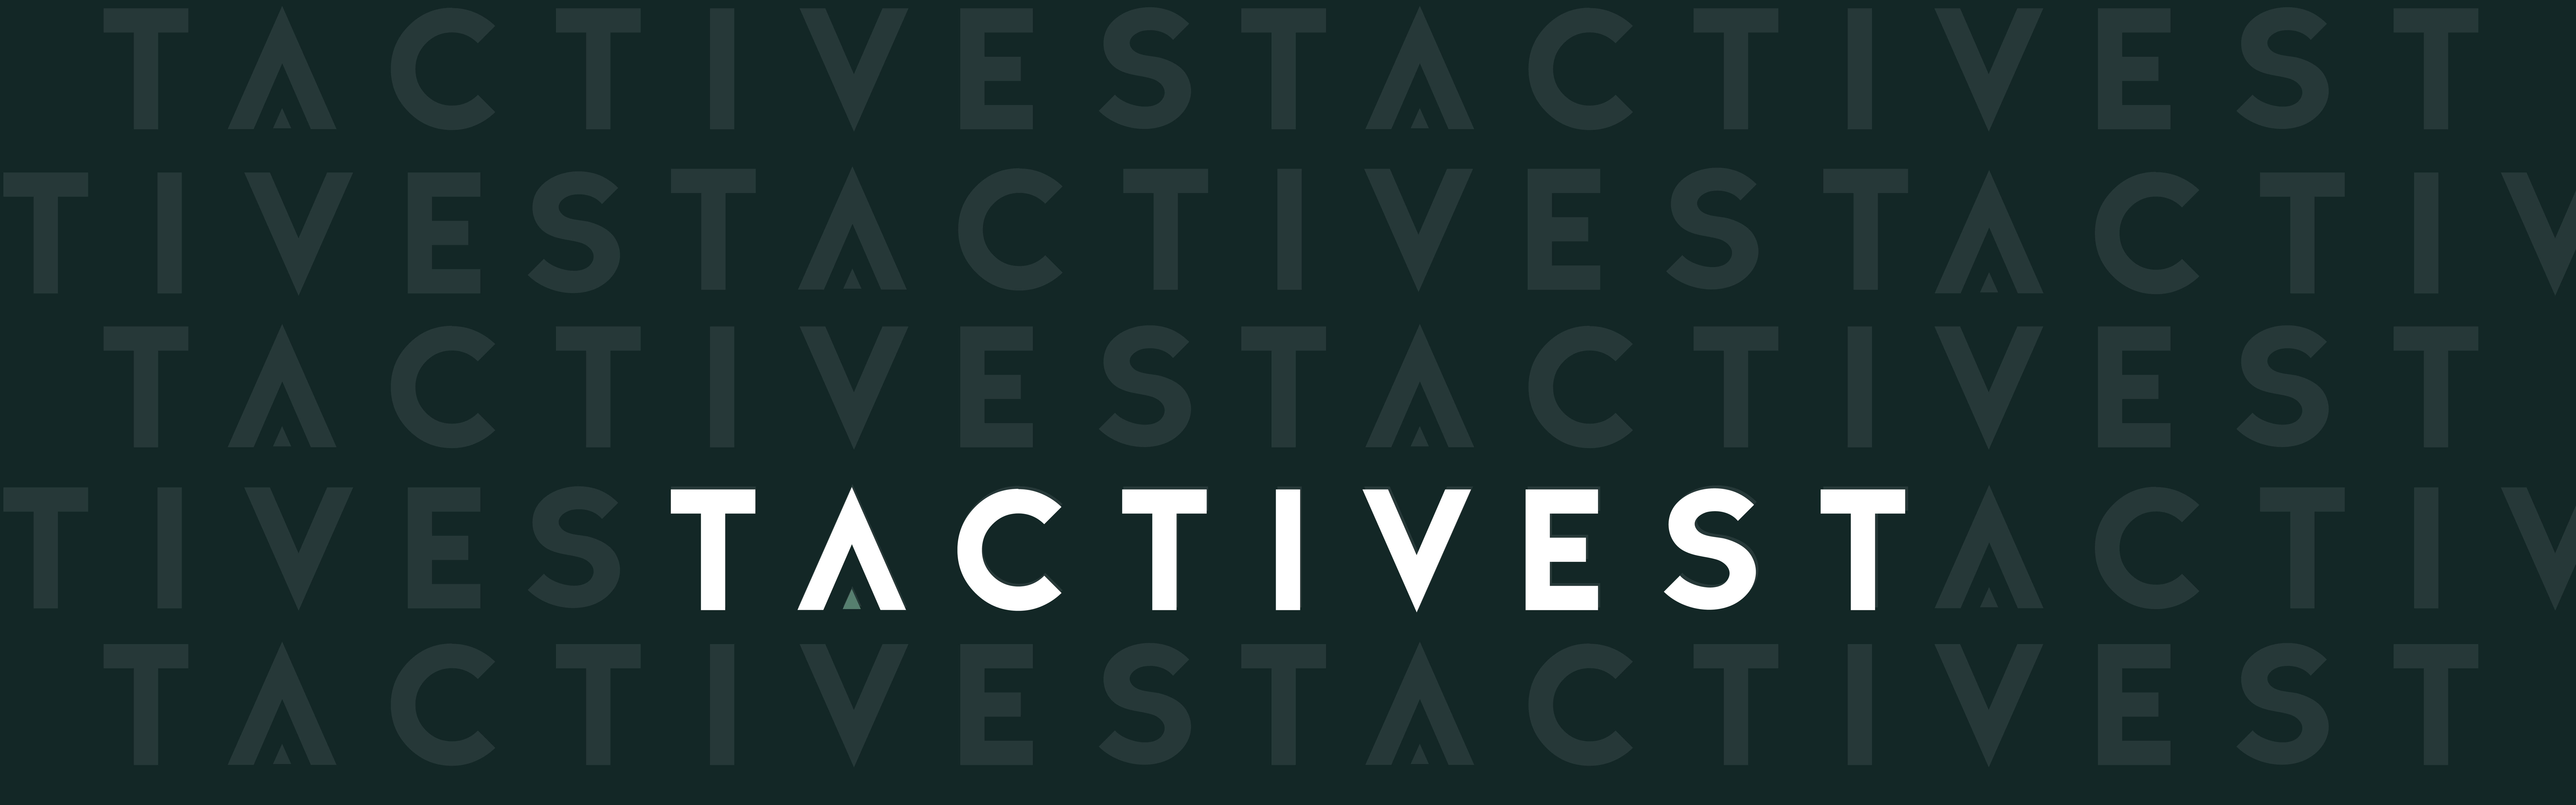 The image displays the word 'TACTIVEST' in capital letters on a dark background, with the same word faintly repeated multiple times in the background, creating a pattern.